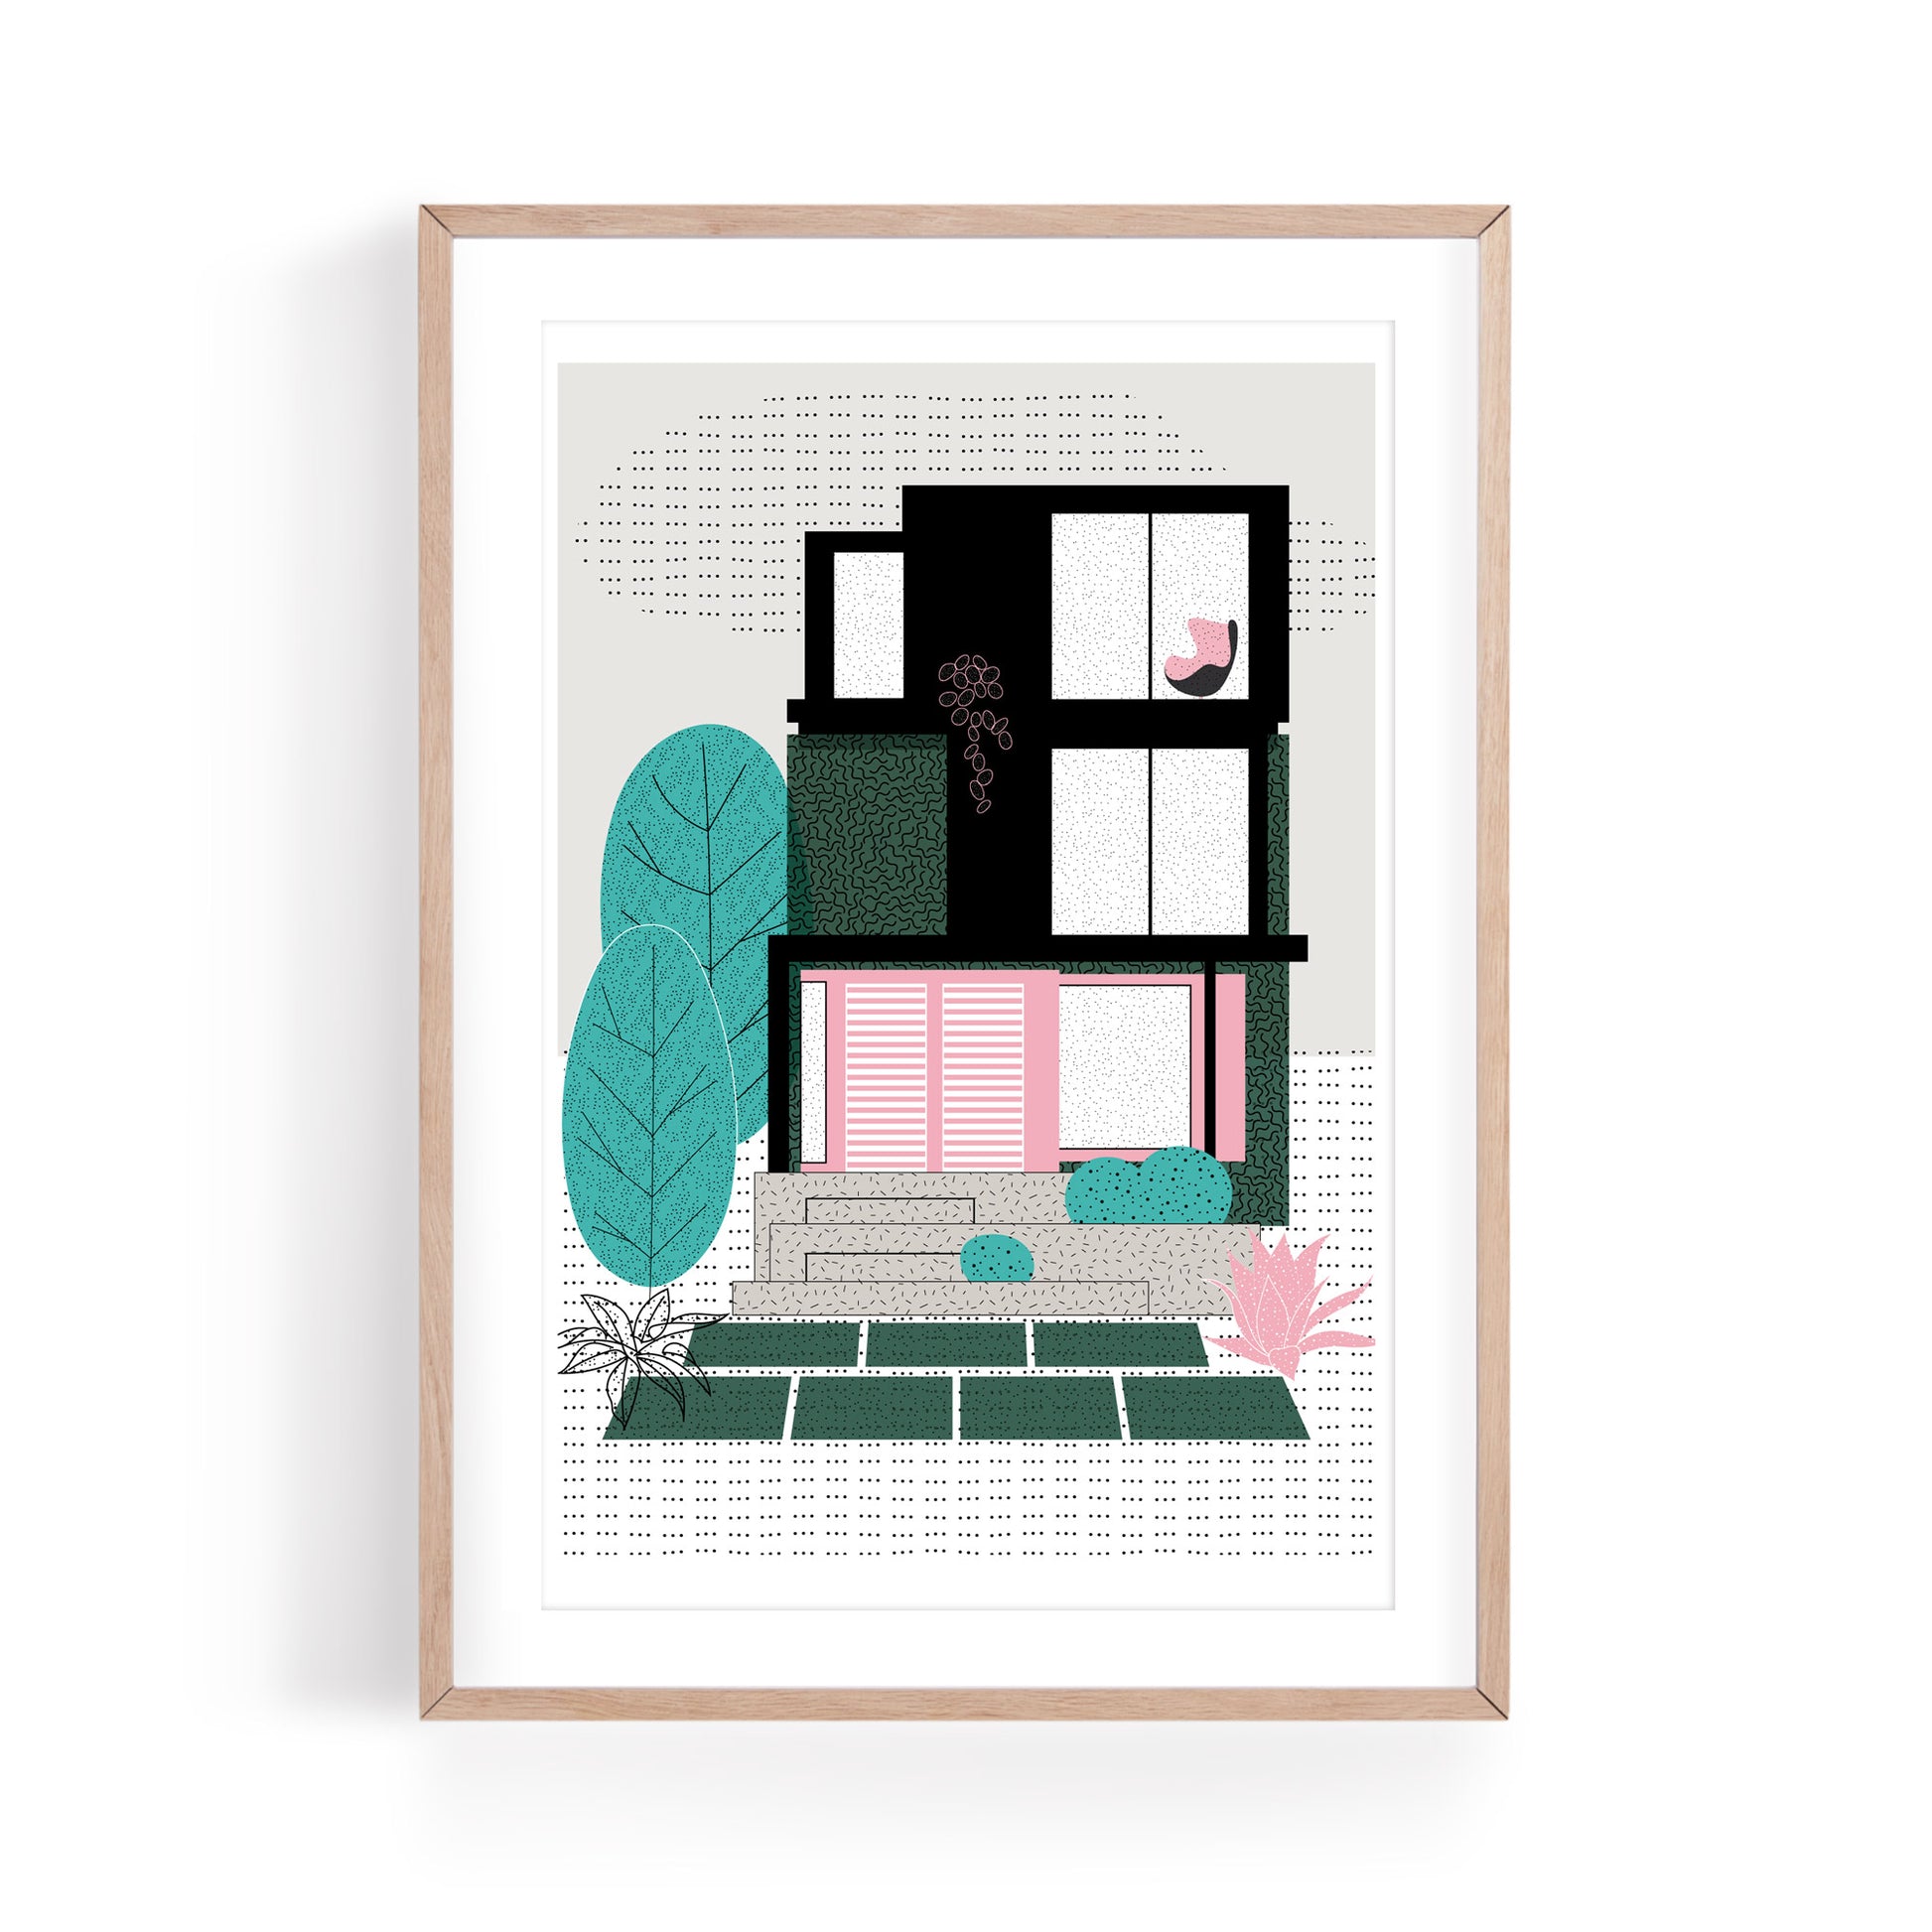 Teal Mid Century Townhouse Art Print by The Print Lass. Shown in a light wood frame (not included) on a white background